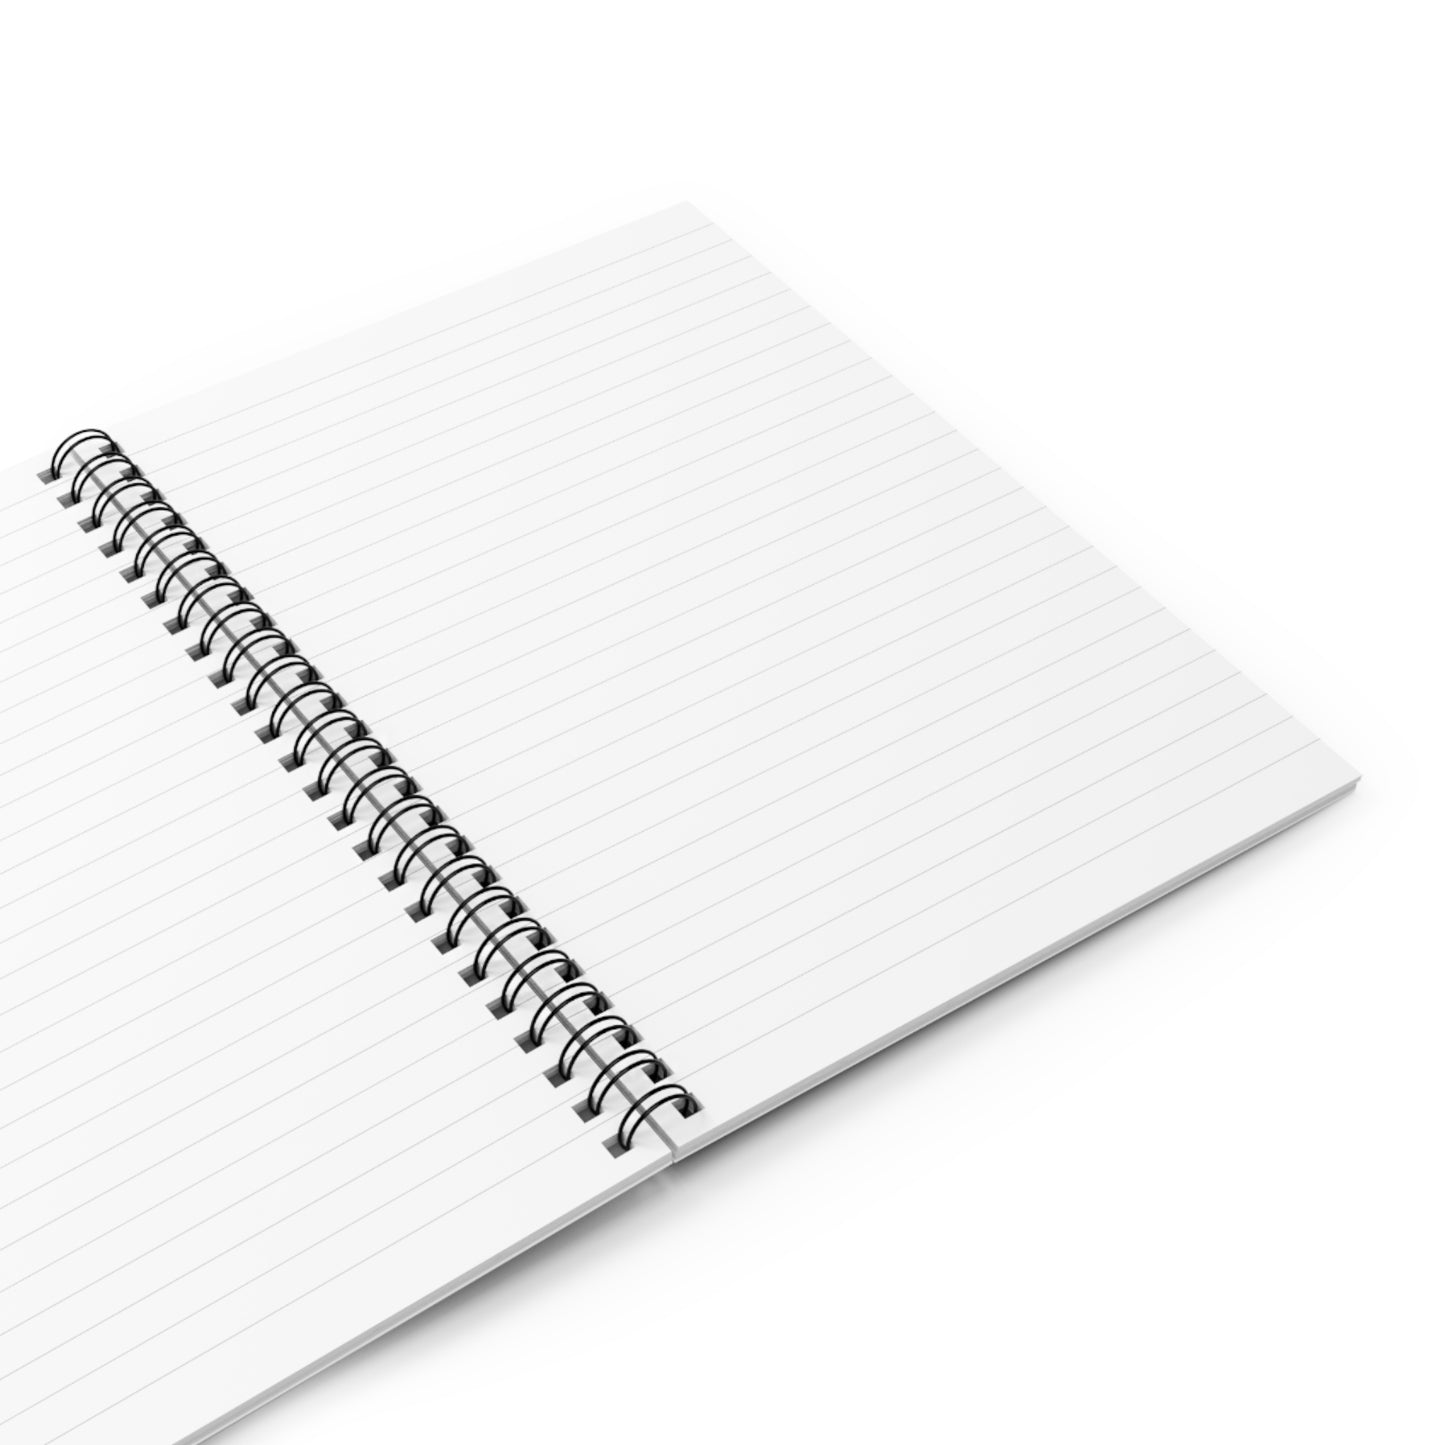 Spiral Notebook (ruled line) - Tidewell Hospice